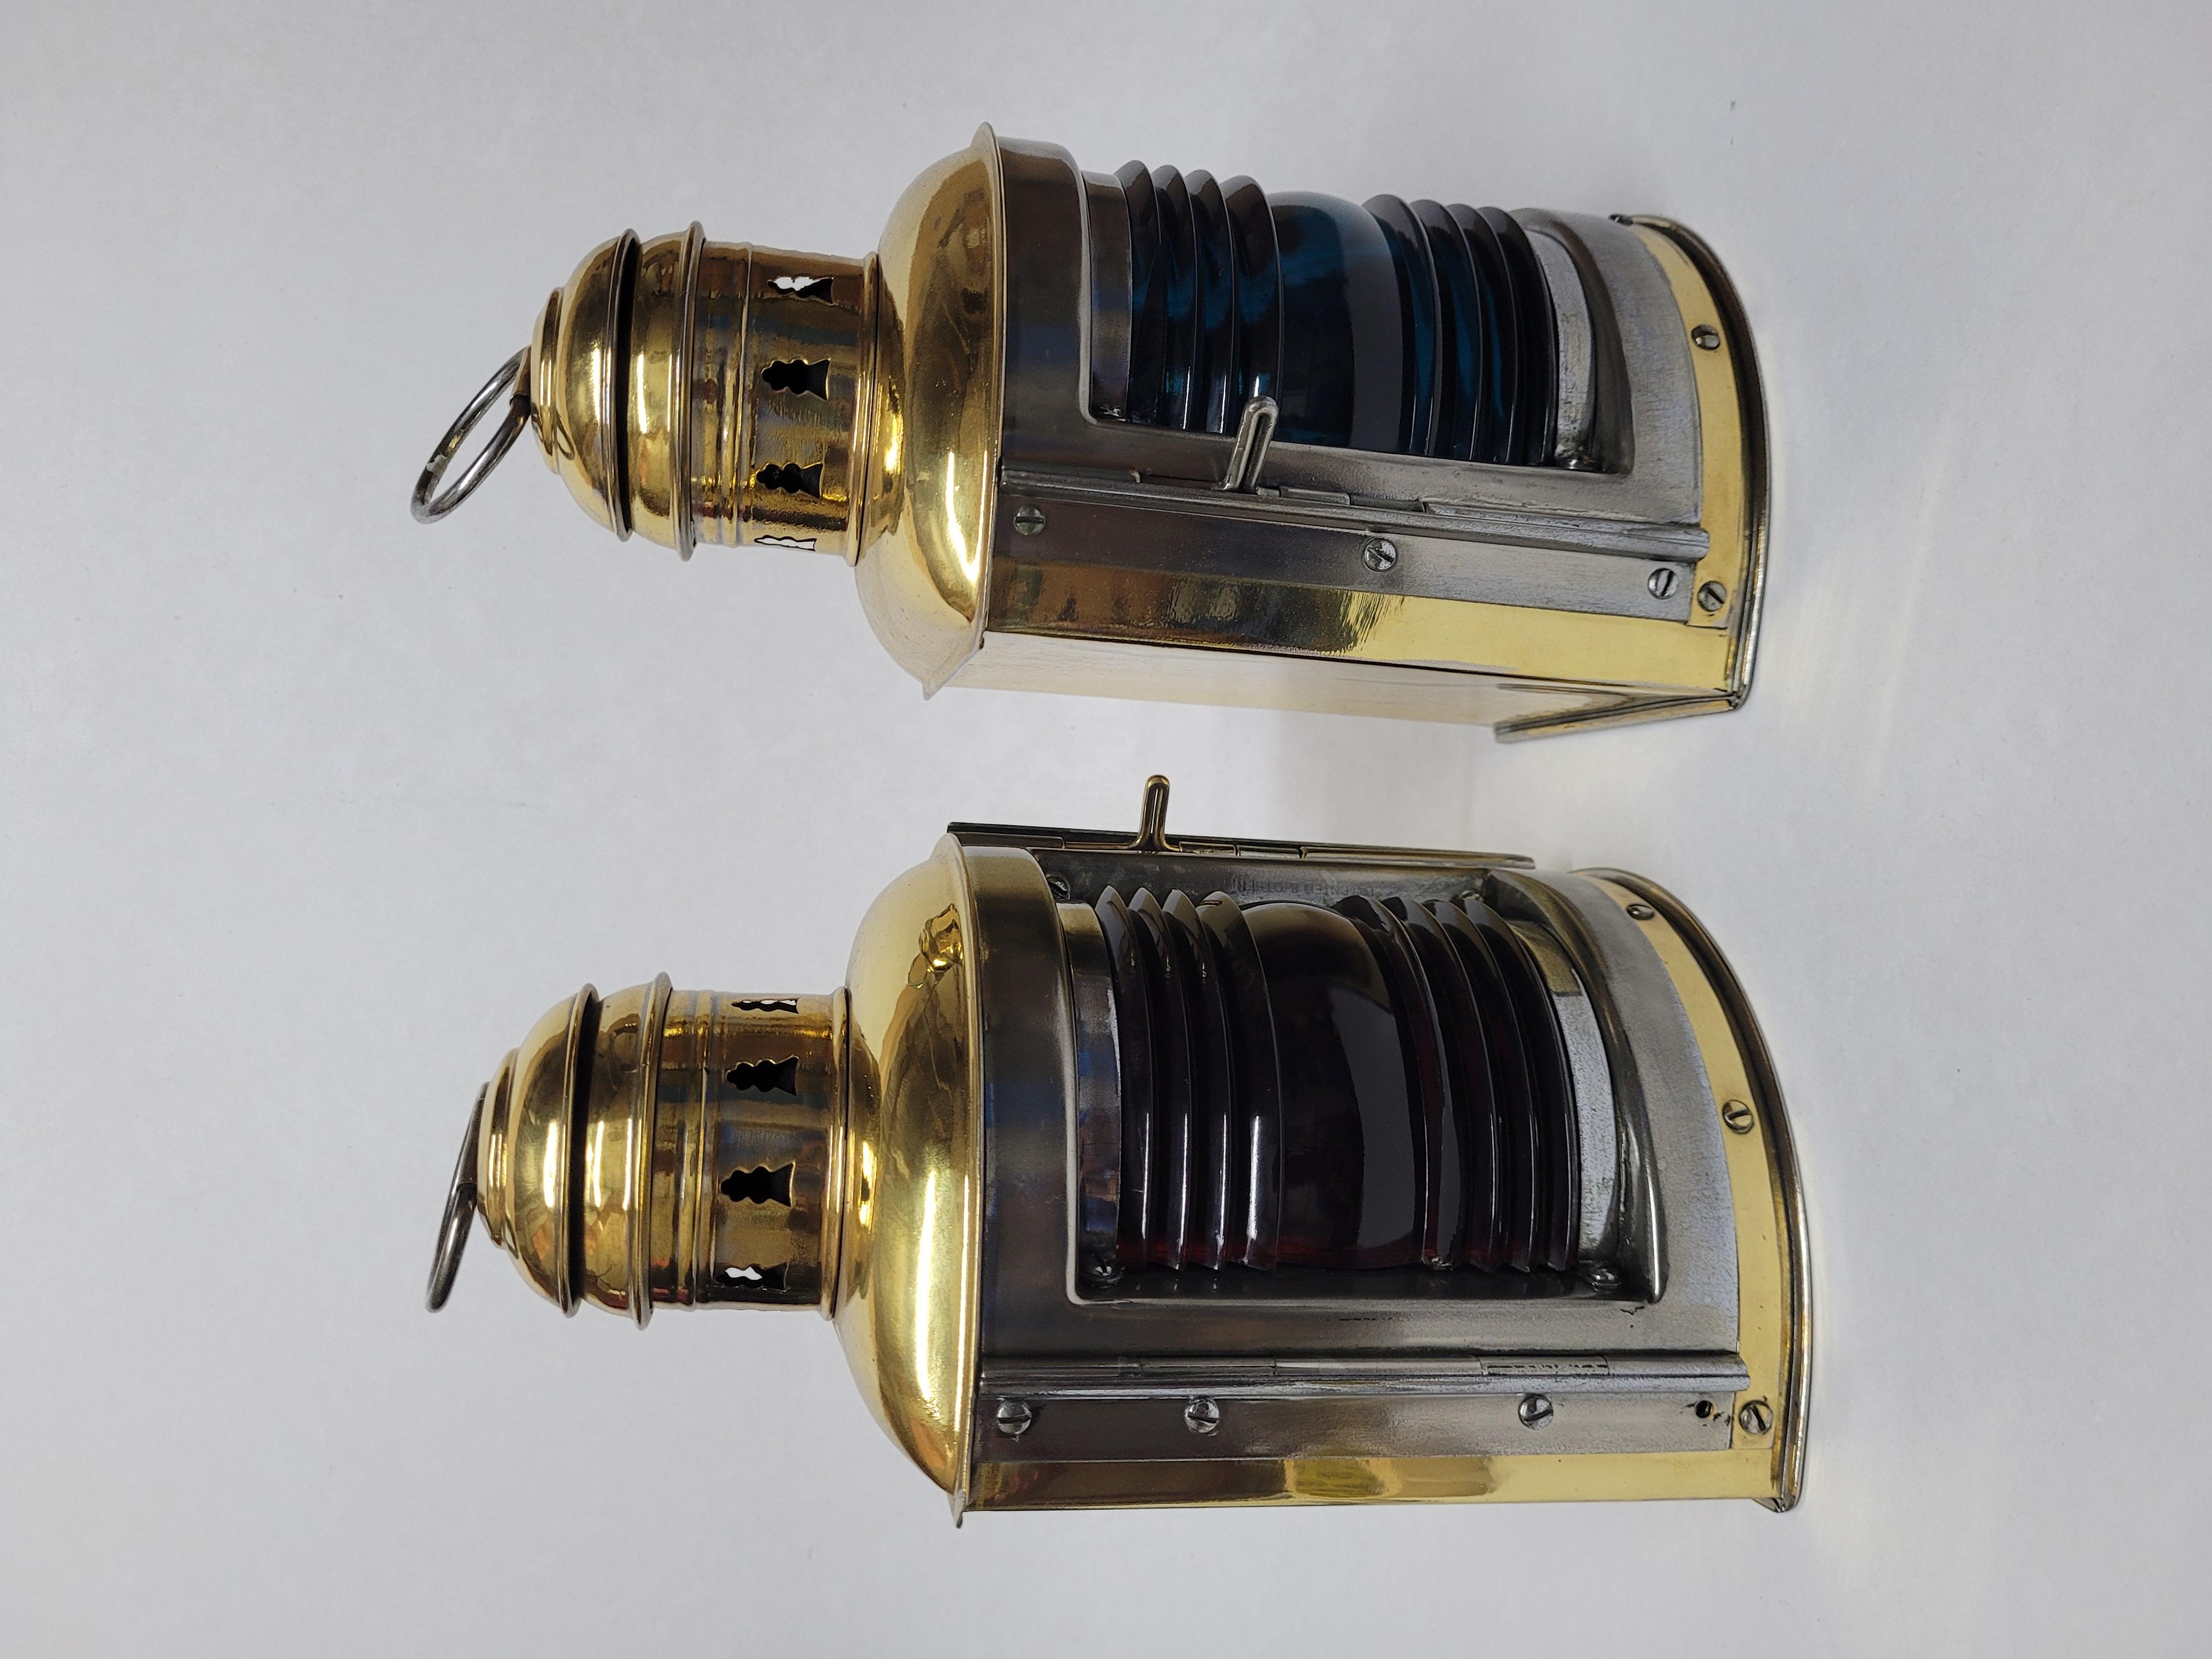 Solid Brass Boat Lanterns by Perko In Good Condition For Sale In Norwell, MA